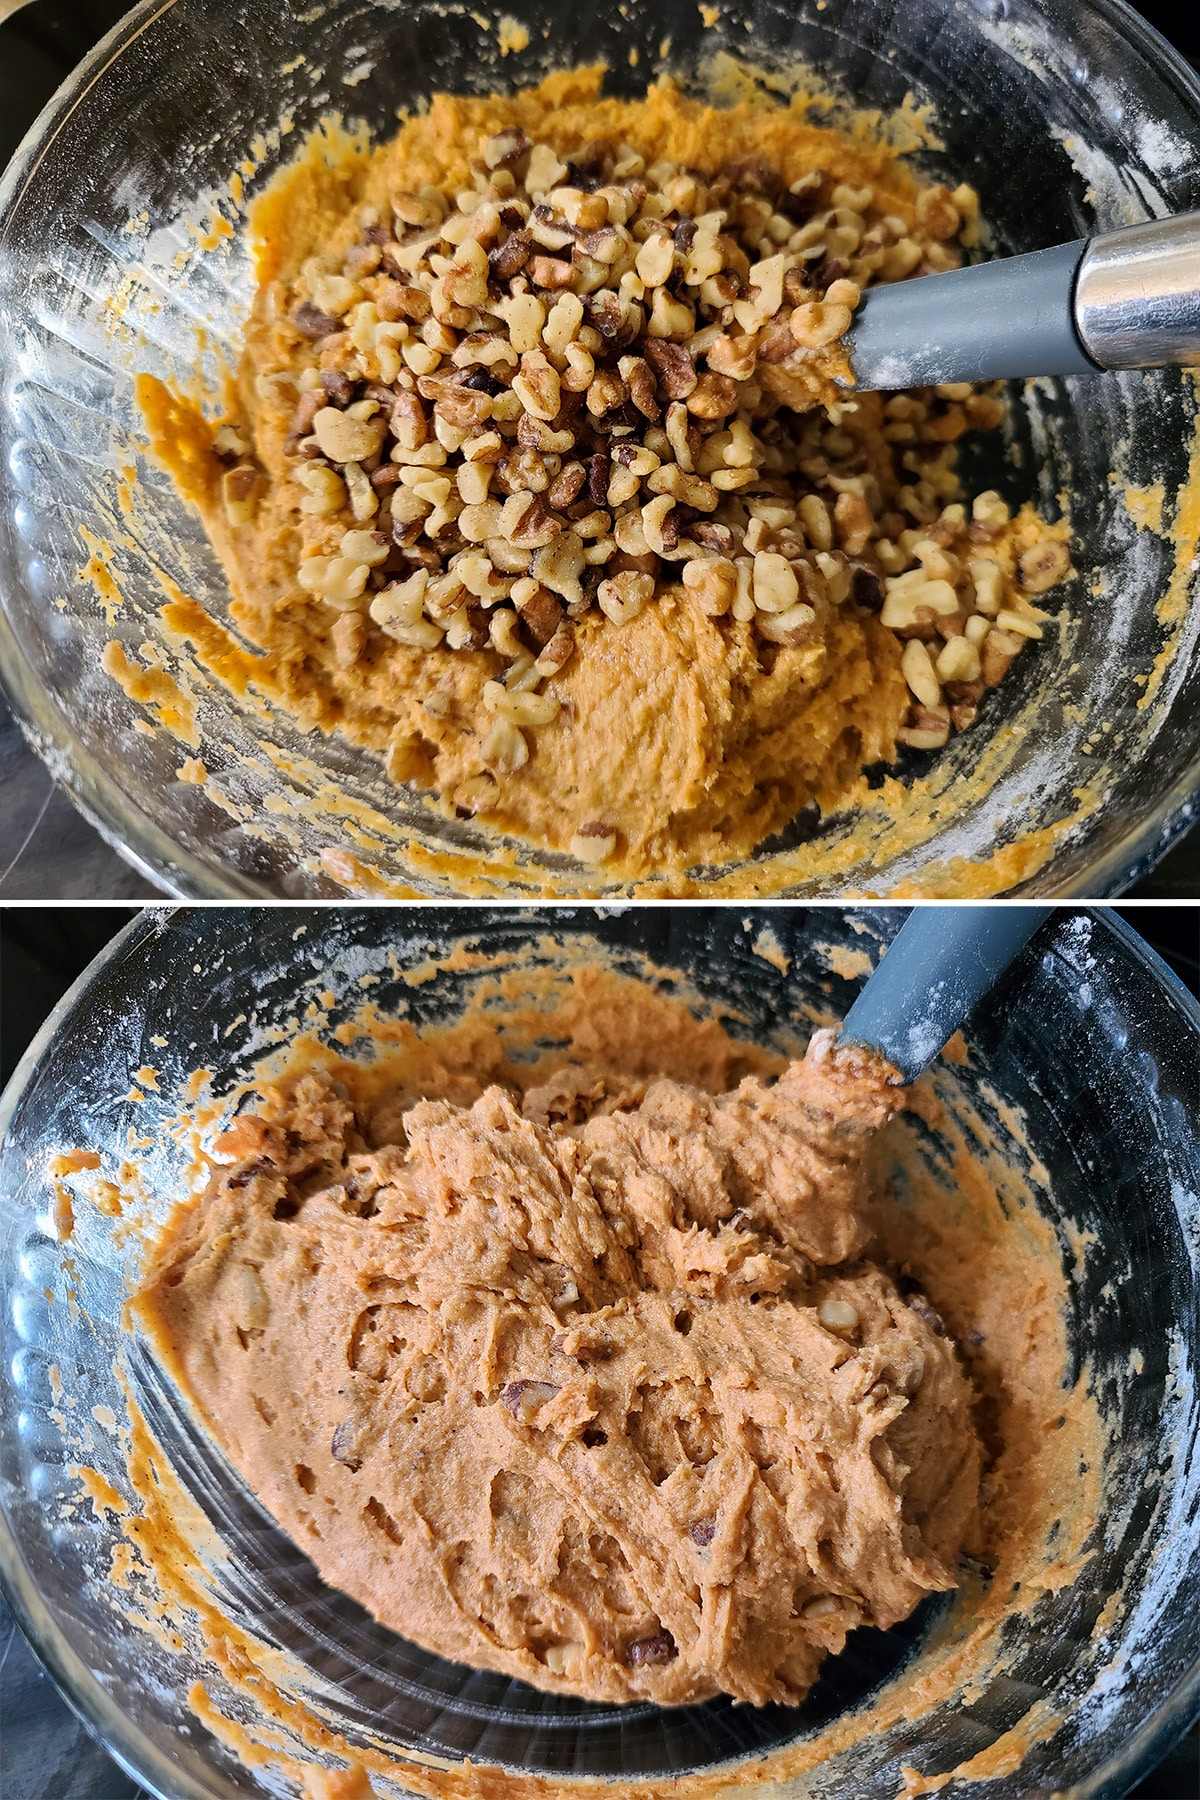 A 2 part image showing the walnuts being mixed into the pumpkin bread batter.